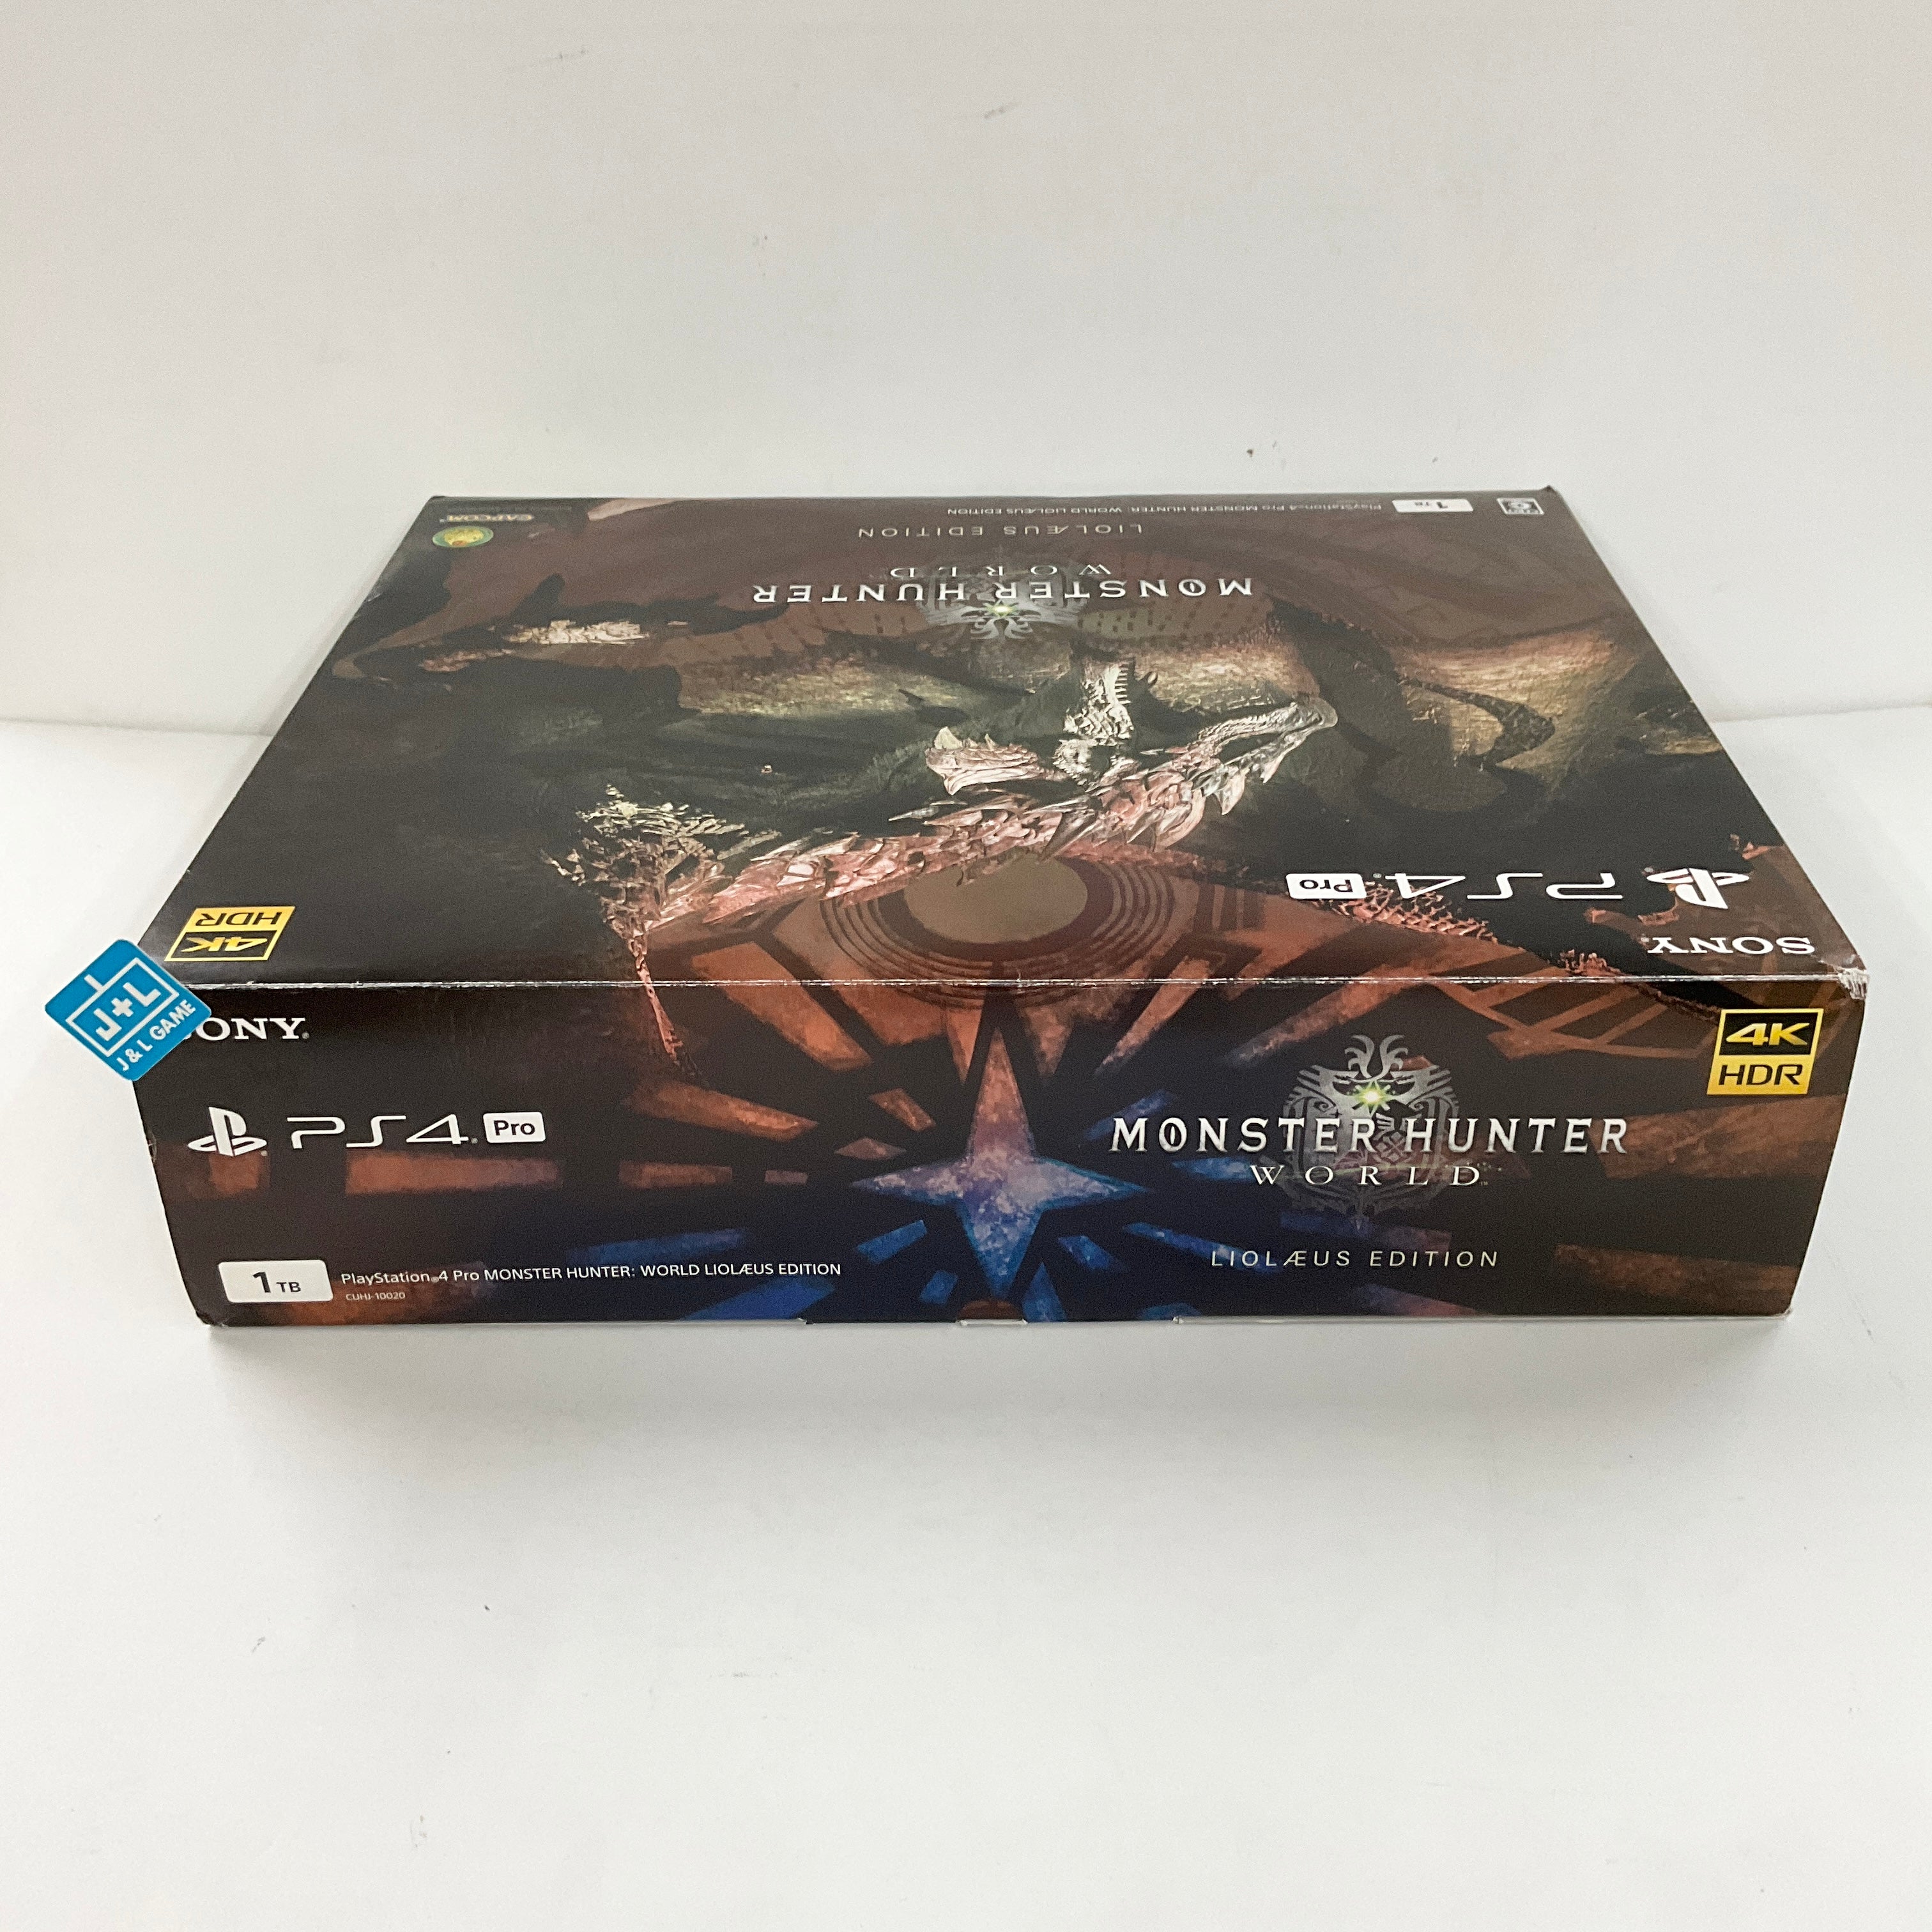 Sony PlayStation 4 Pro Monster Hunter: World Liolaeus (Rathalos) Edition - (PS4) Playstation 4 [Pre-Owned] Consoles Sony   